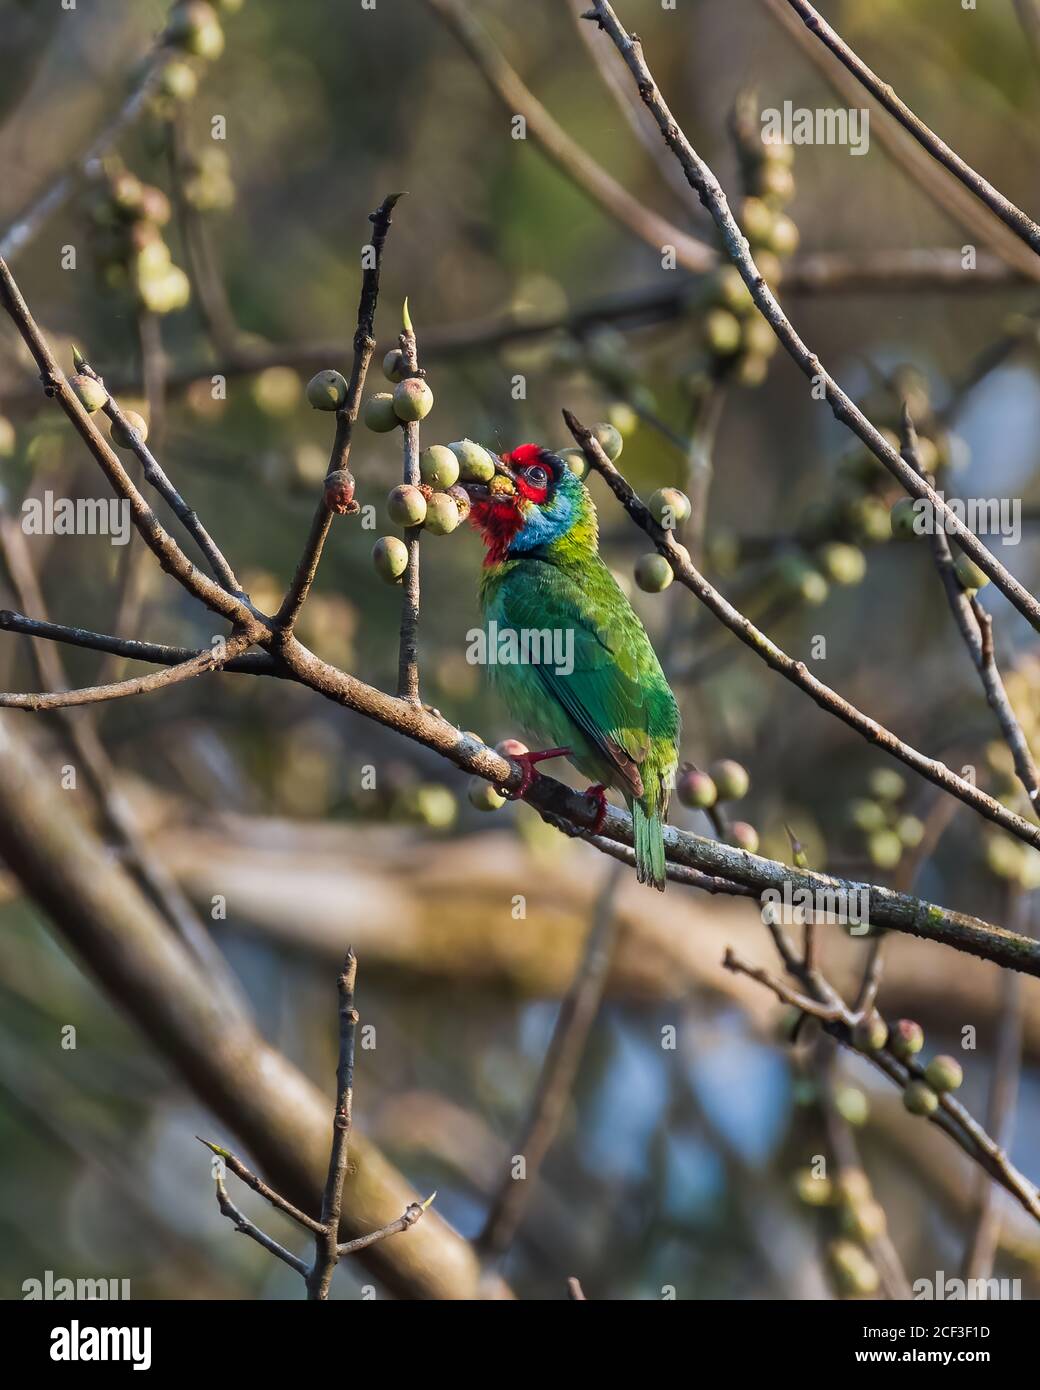 A colourful Malabar Barbet (Megalaima malabarica), is greedily stuffing itself with some wild berries. Stock Photo